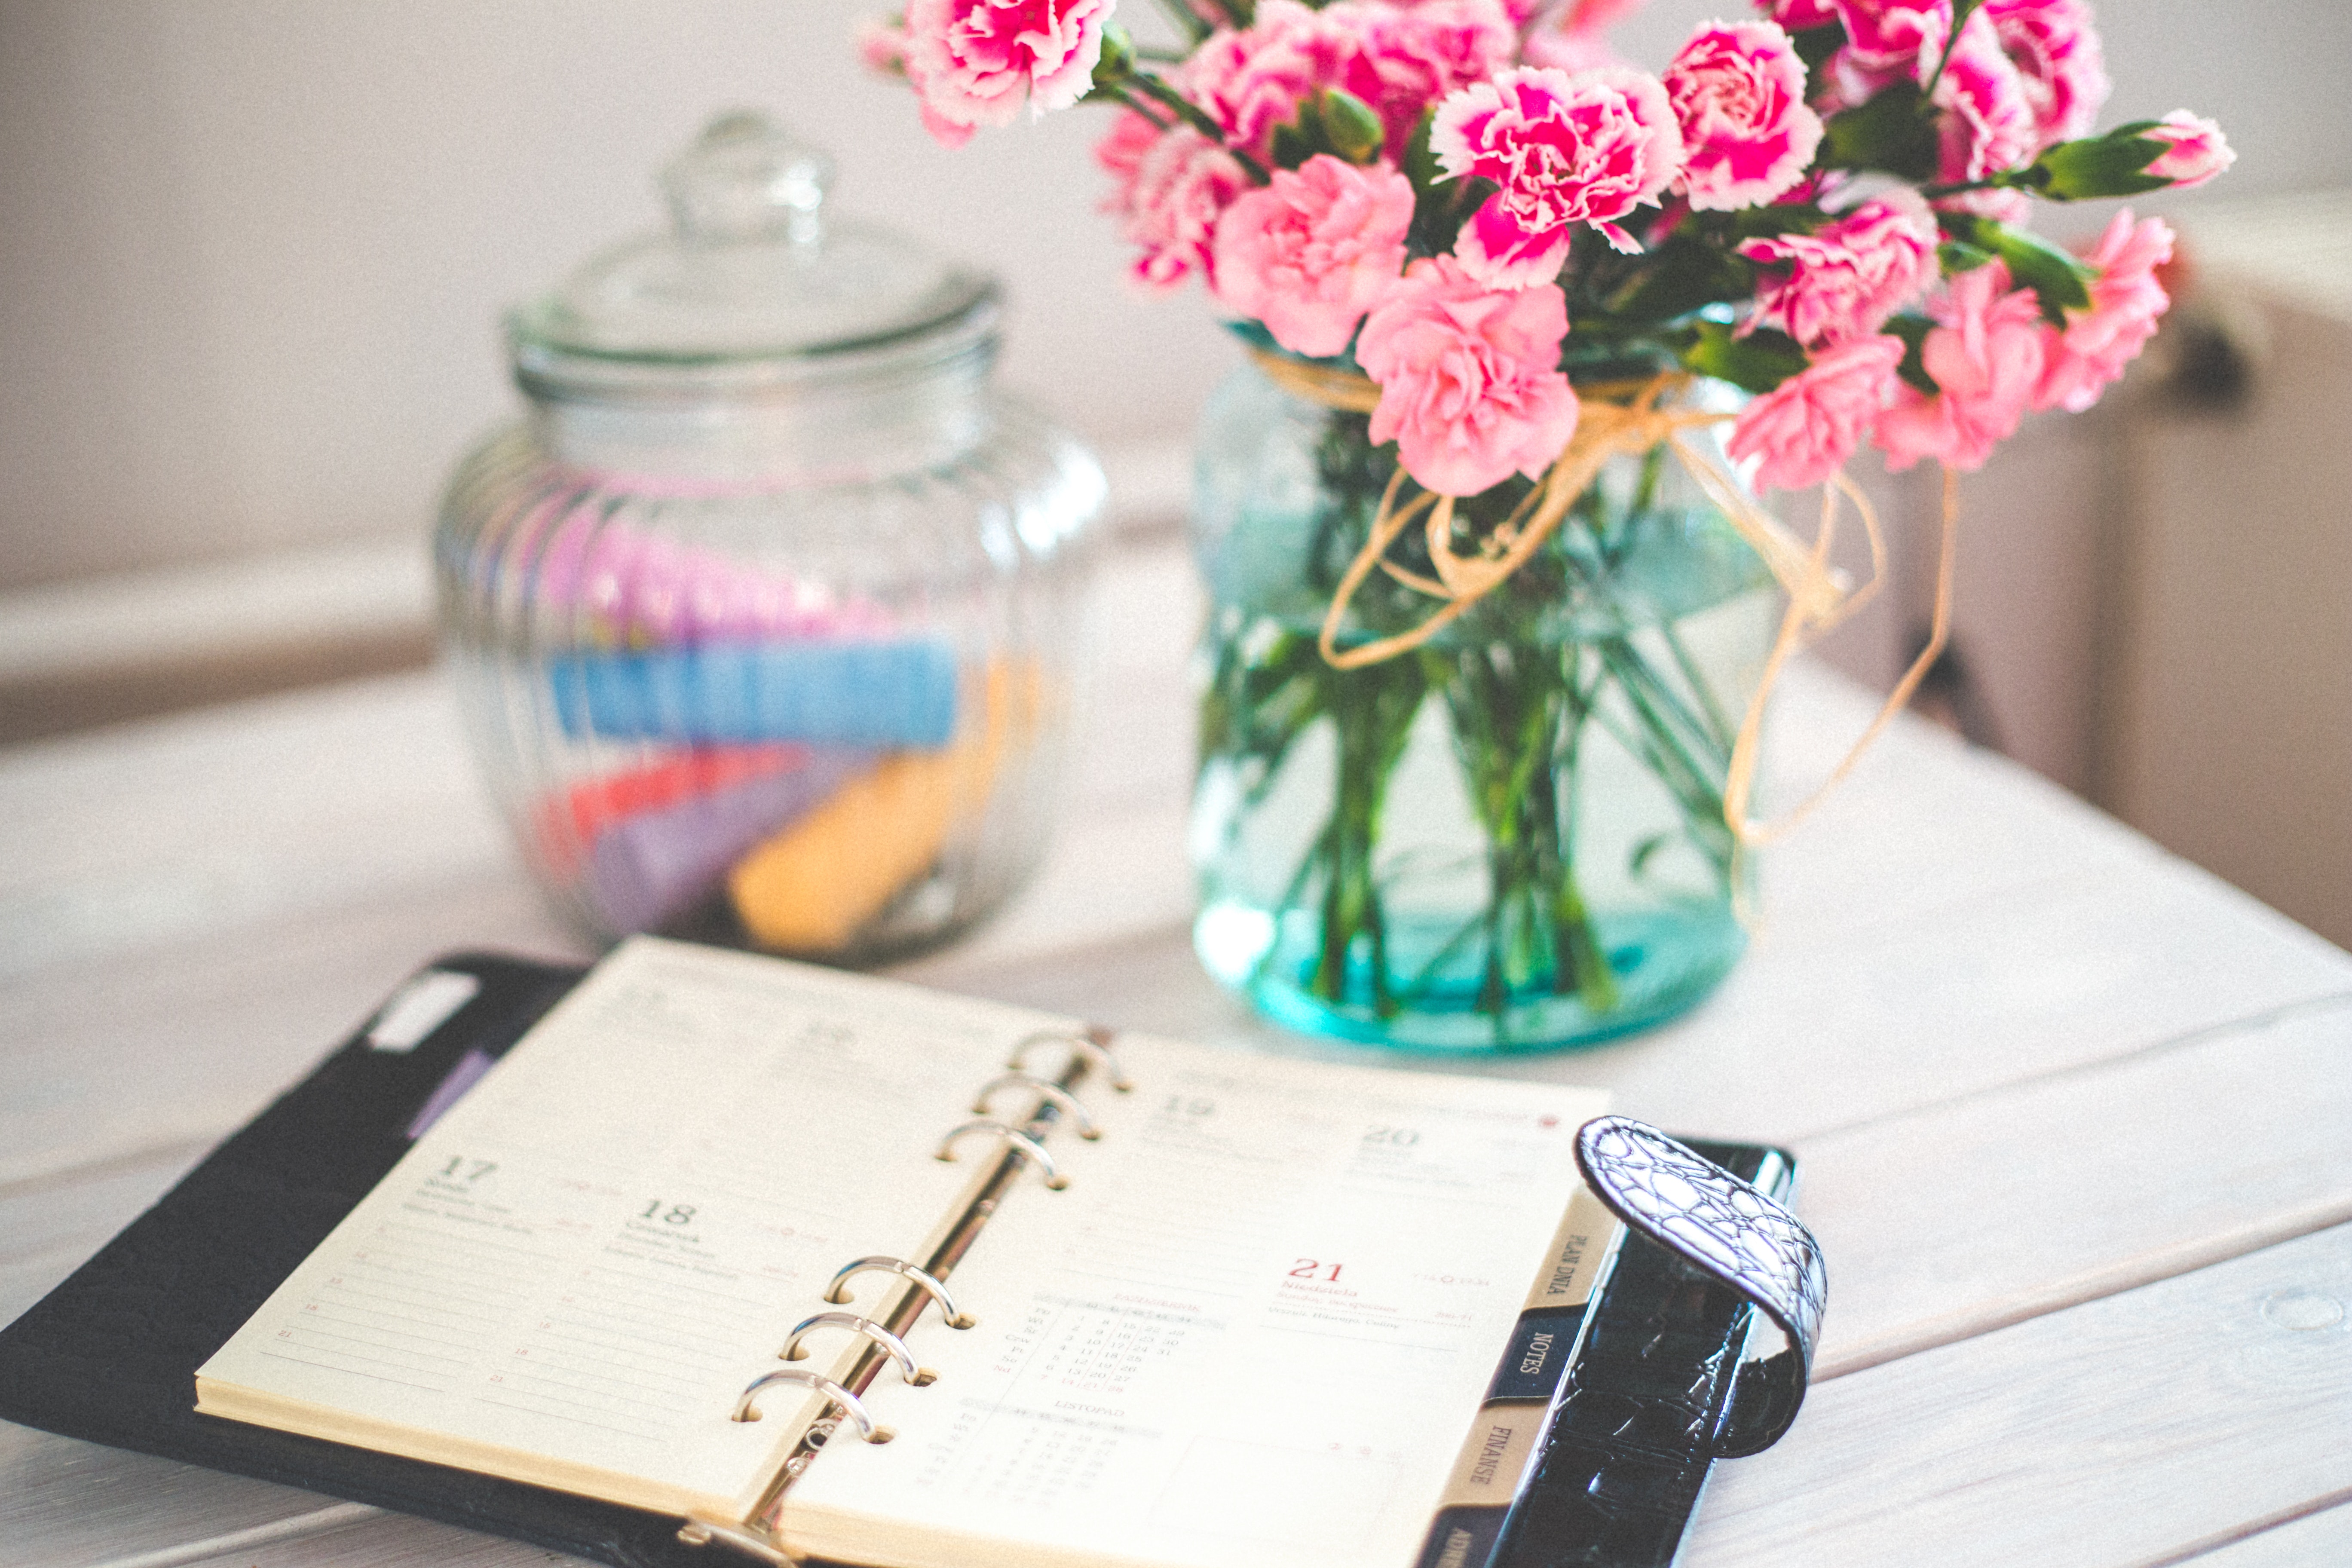 Personal organizer and pink flowers on desk, Bouquet, Business, Businesswoman, Calendar, HQ Photo